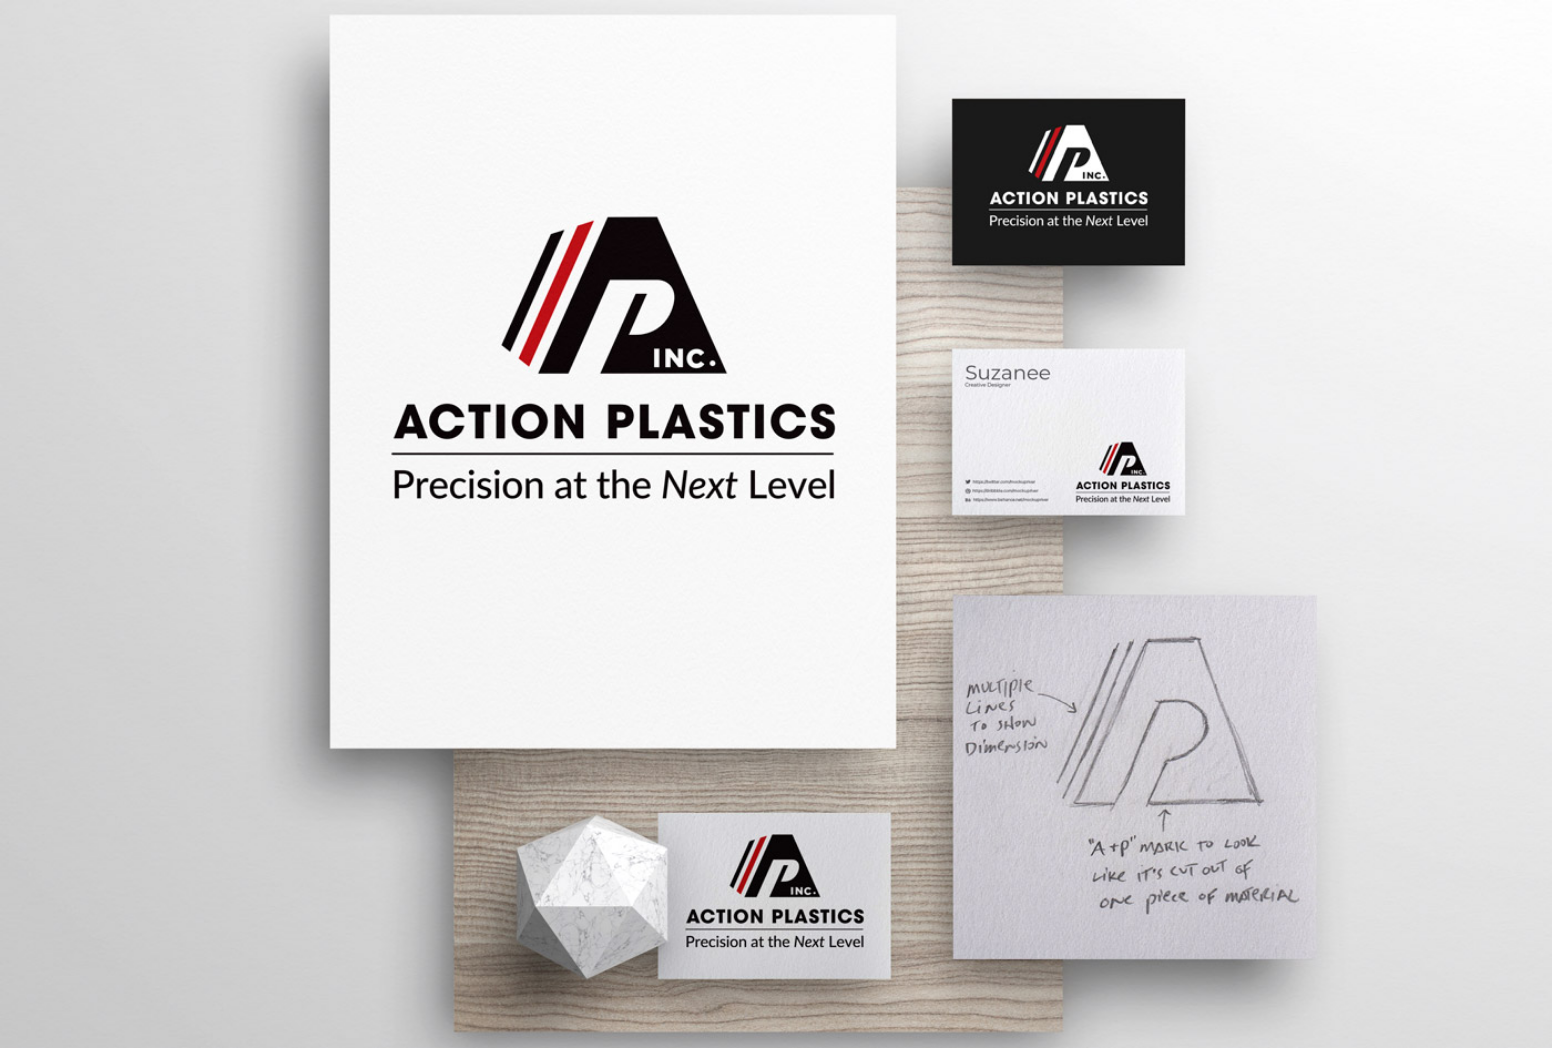 business cards and a flyer showing the Action Plastics logo